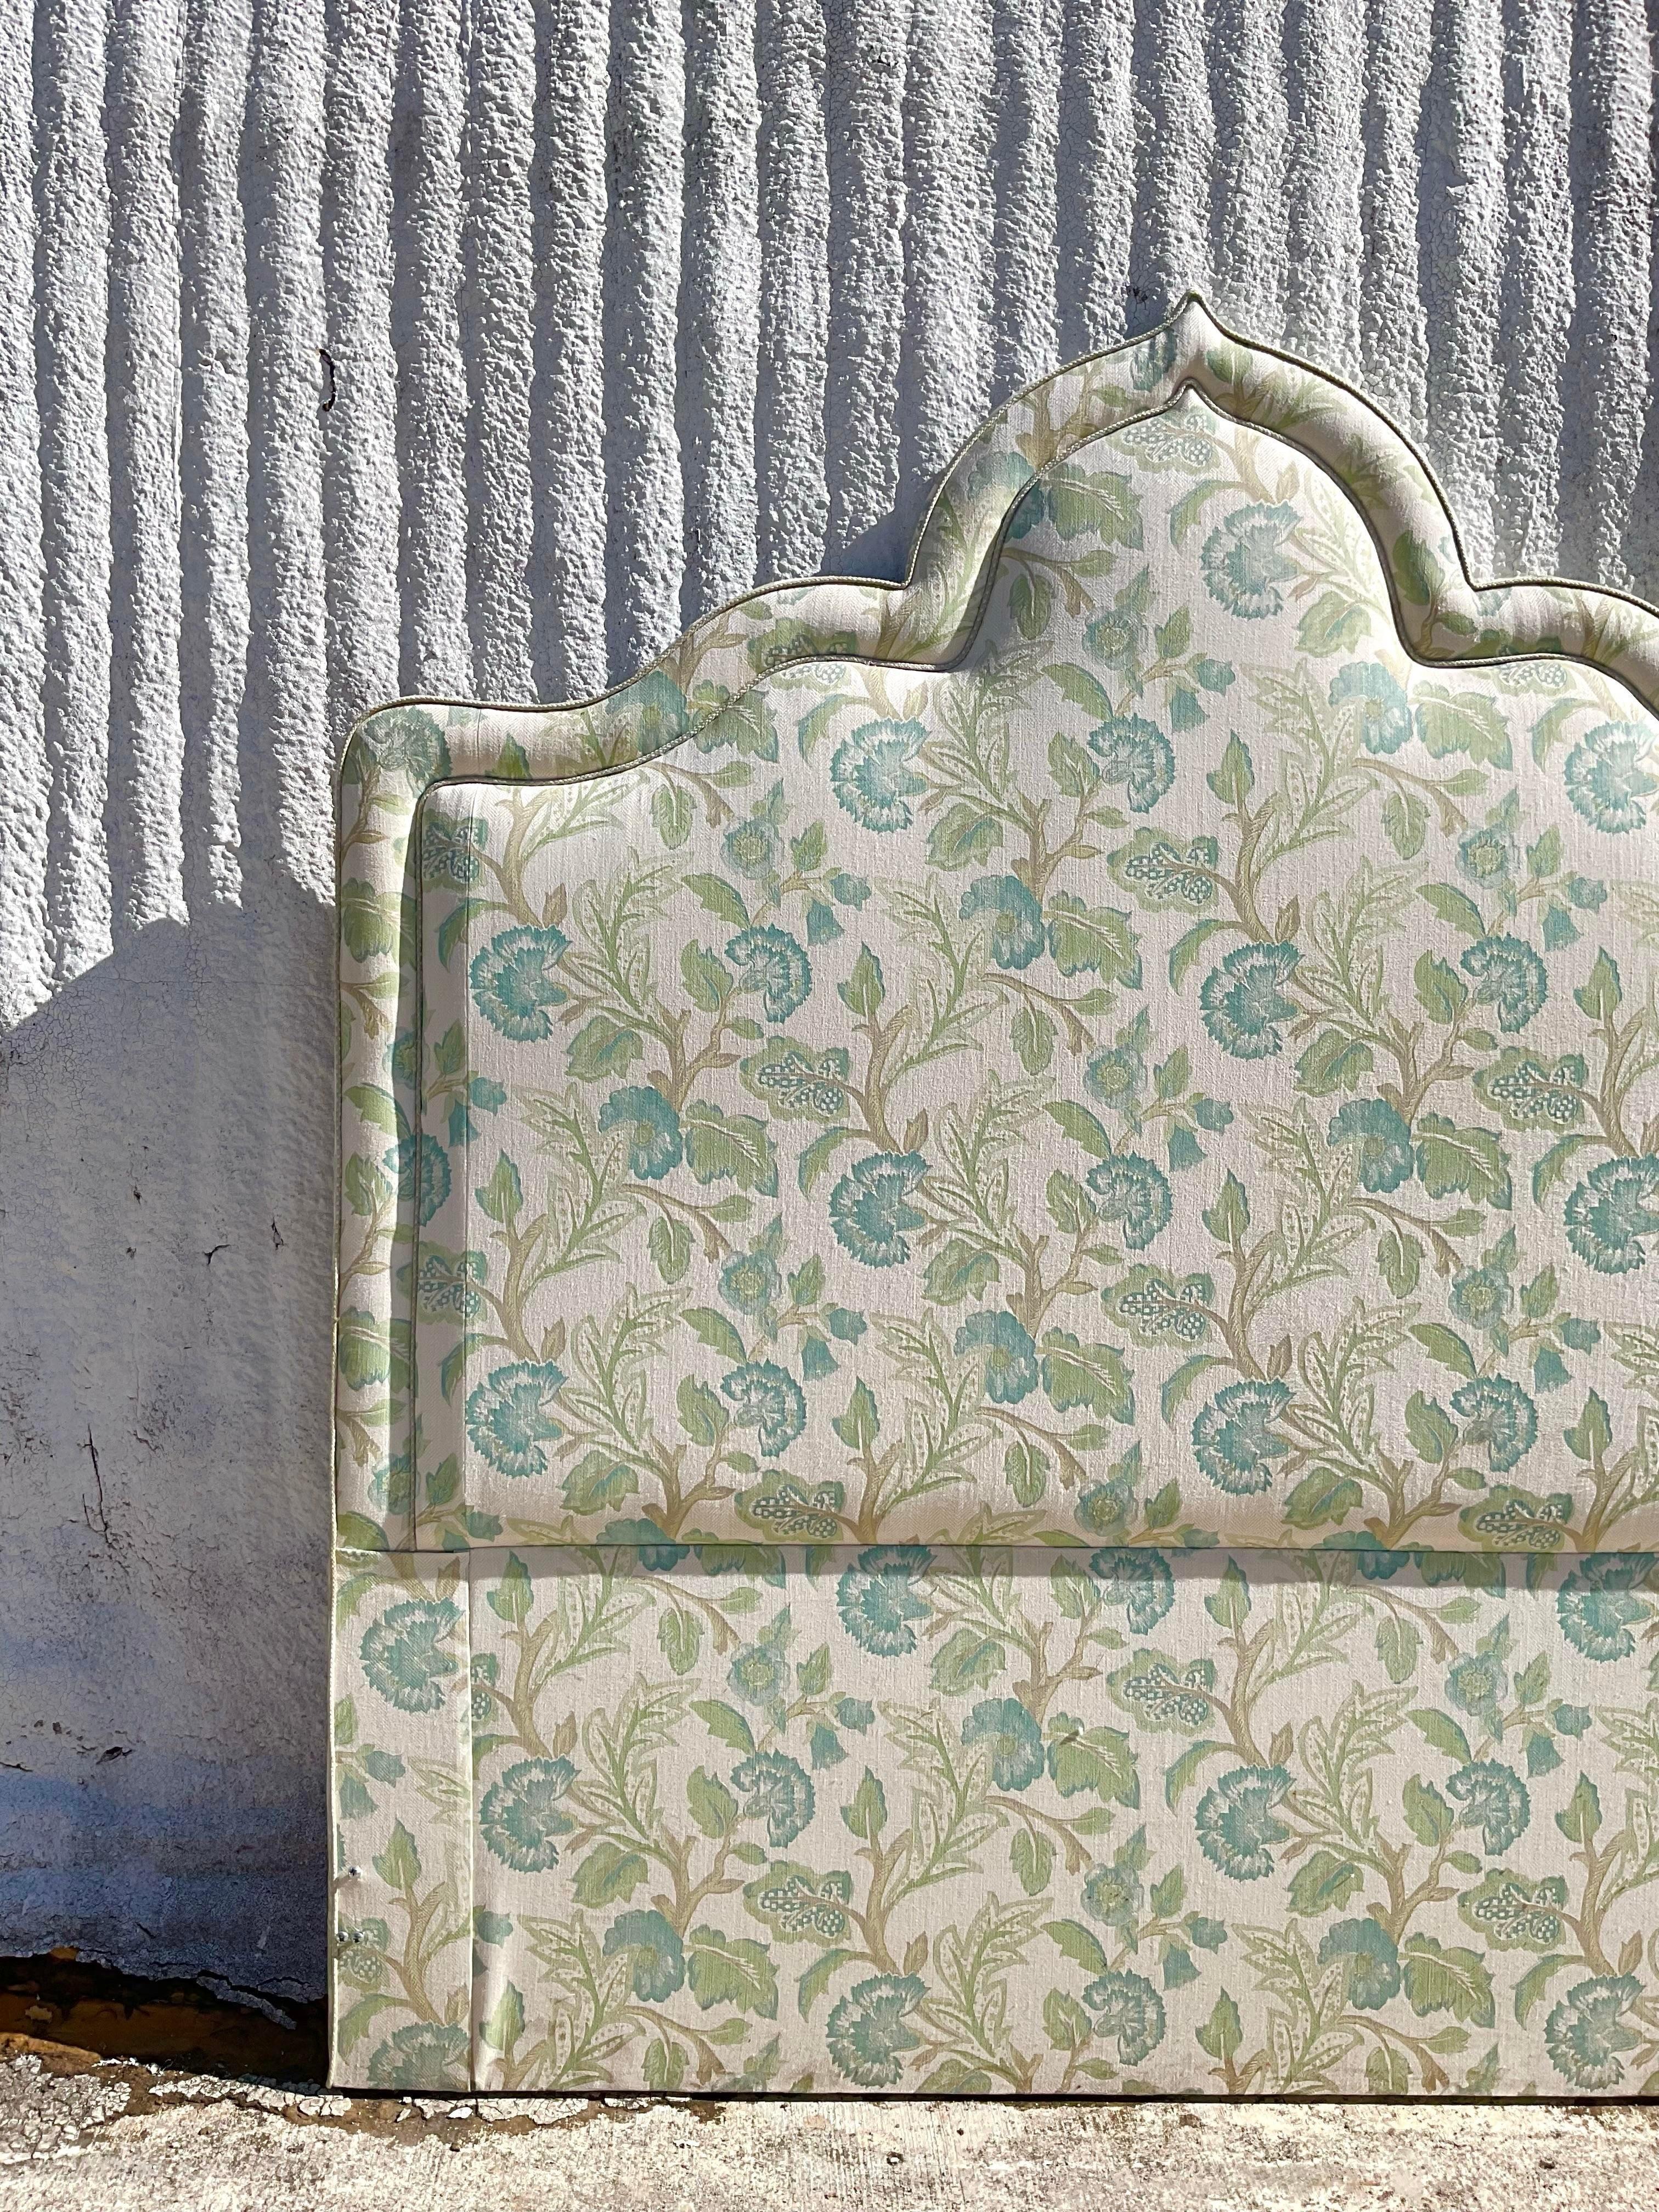 A fabulous vintage headboard upholstered in a floral fabric. Beautiful piping trim detailing. Acquired at a Palm Beach estate.